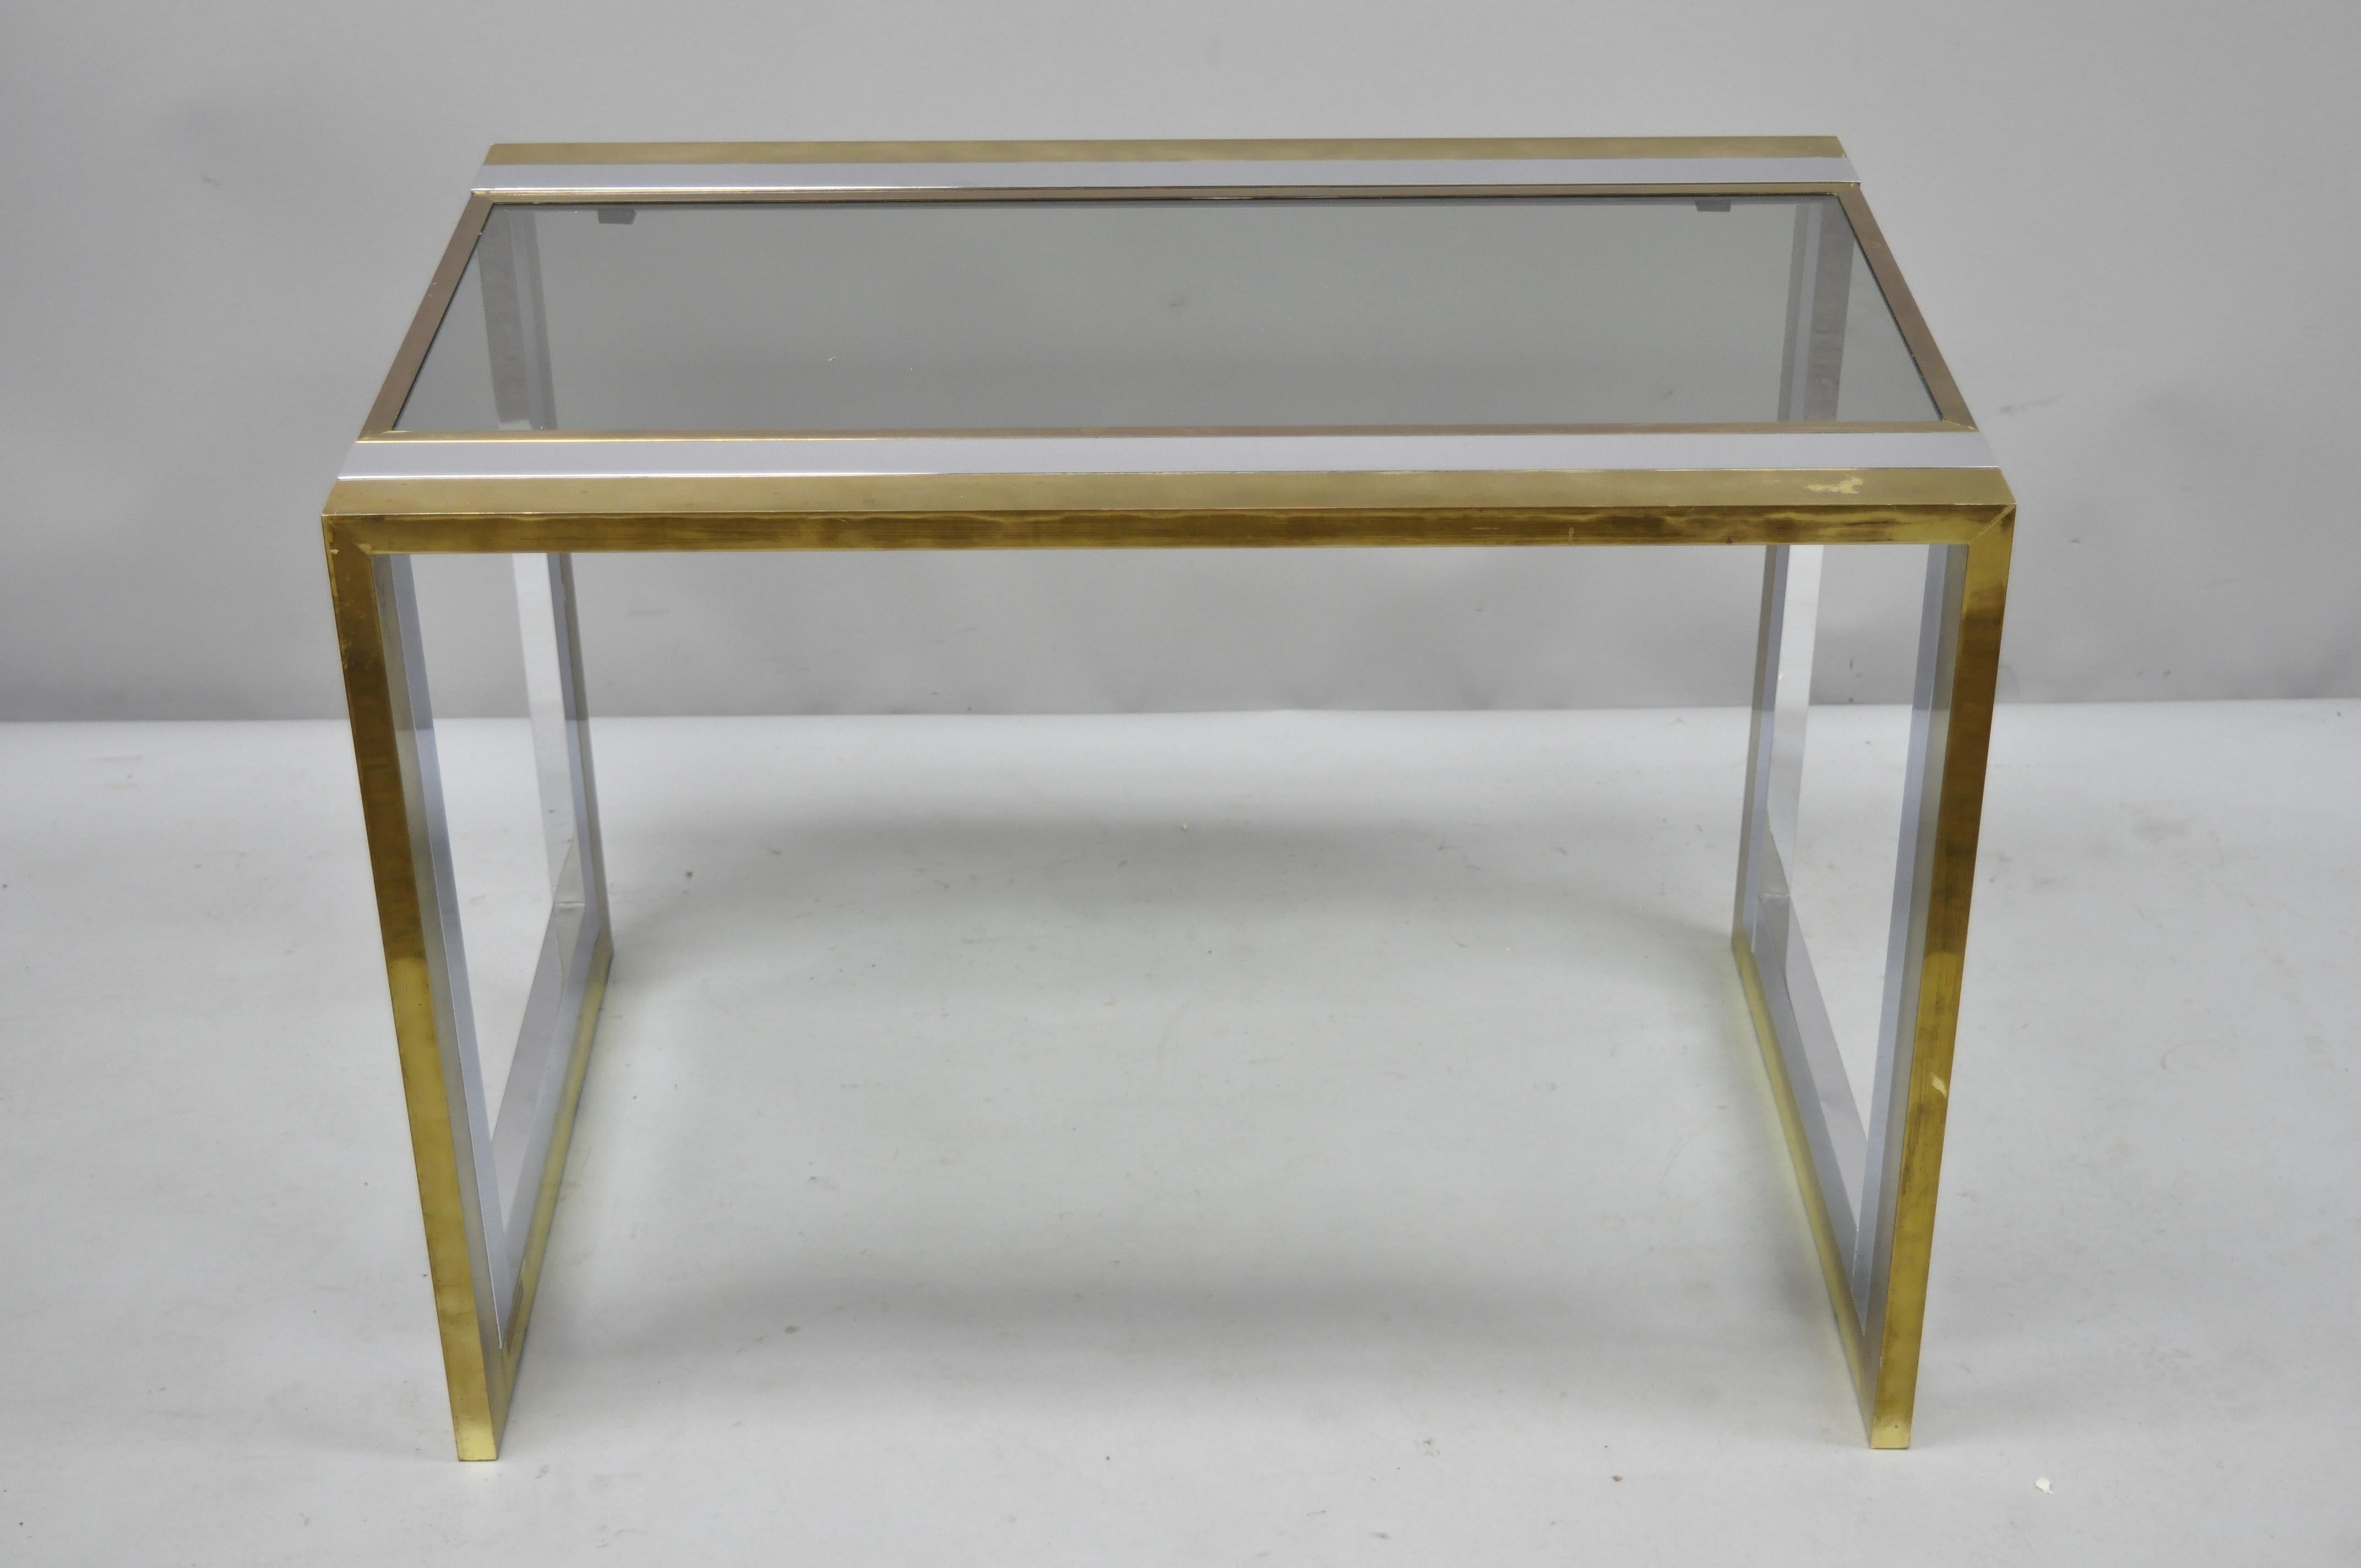 Vintage Mid-Century Modern chrome brass glass waterfall side table by Messin Finland. Chrome and brass waterfall frame, glass top, original label, clean modernist lines, sleek sculptural form, circa 1970. Measurements: 21